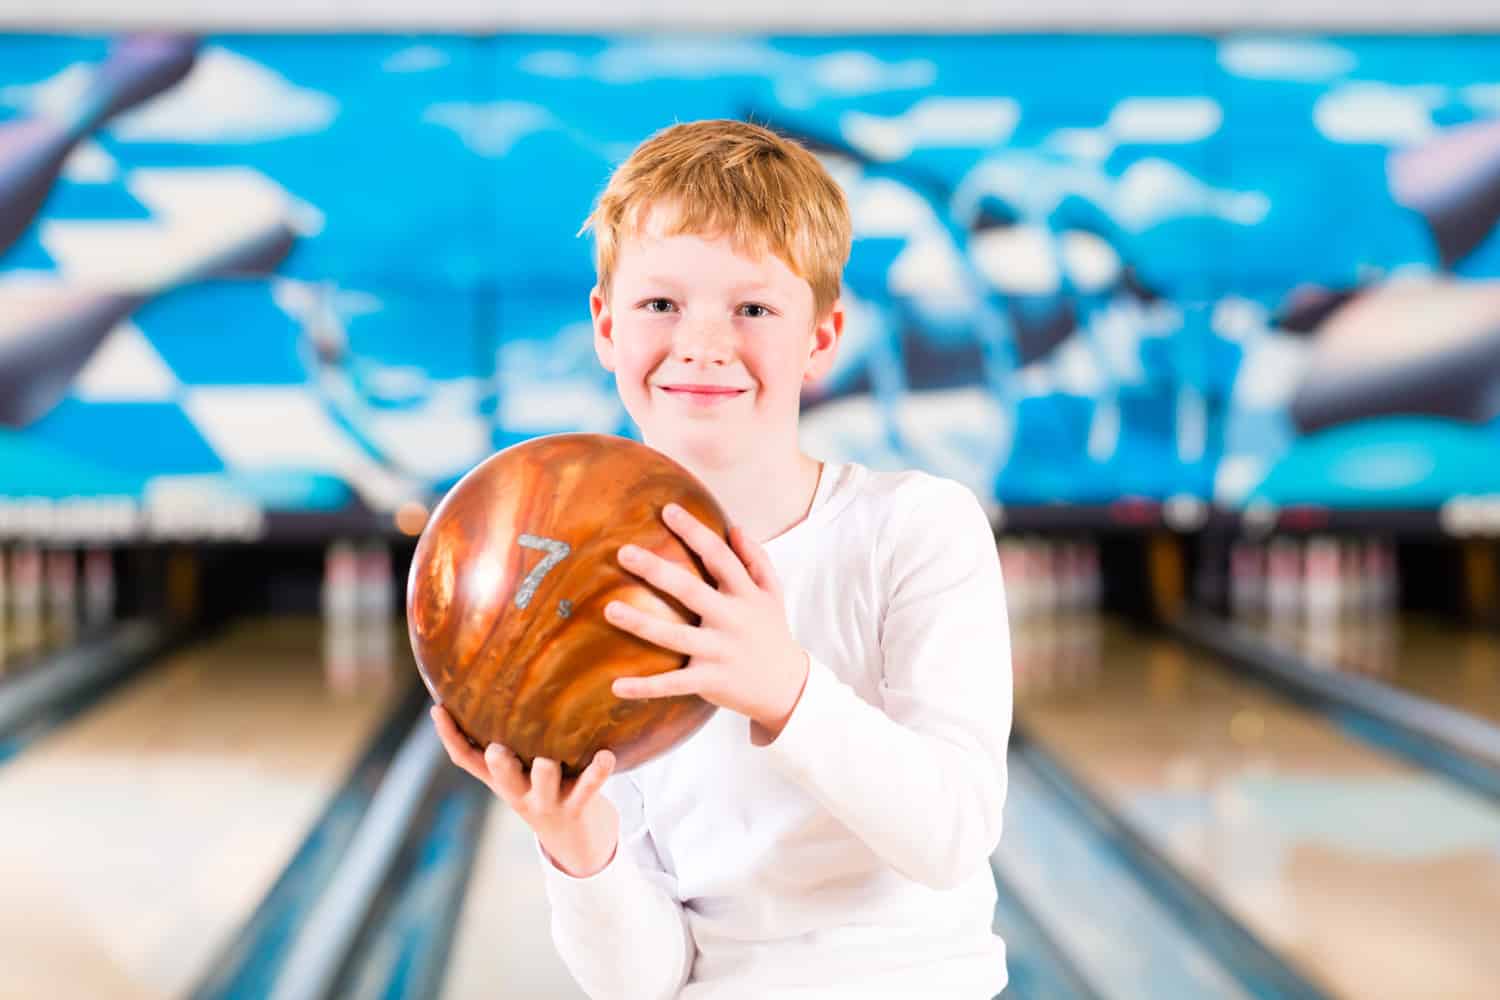 Child bowling with ball in alley